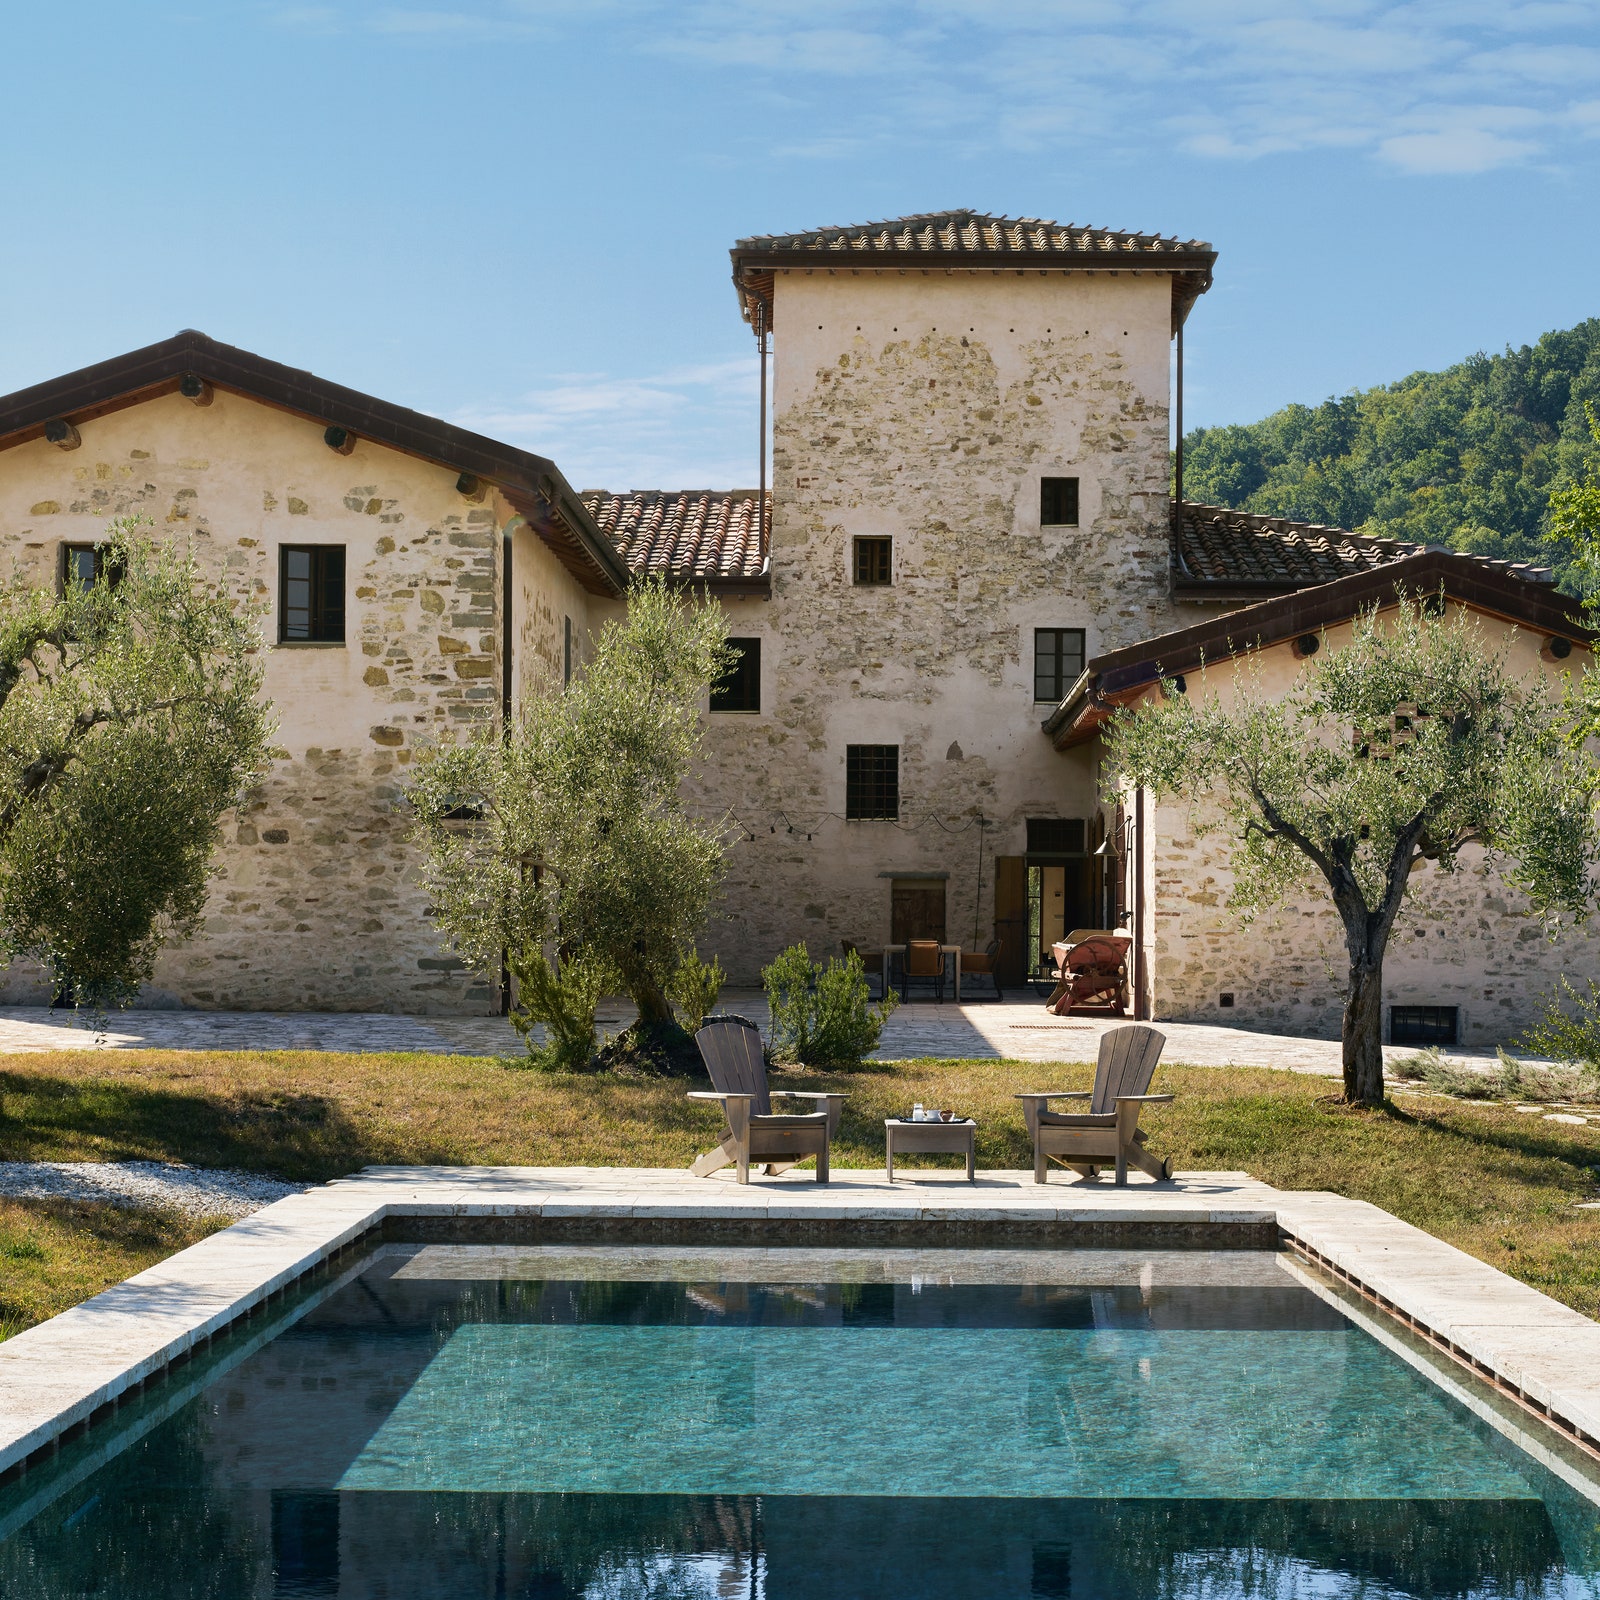 Glorious Tuscan country houses that will have you wanting to move there